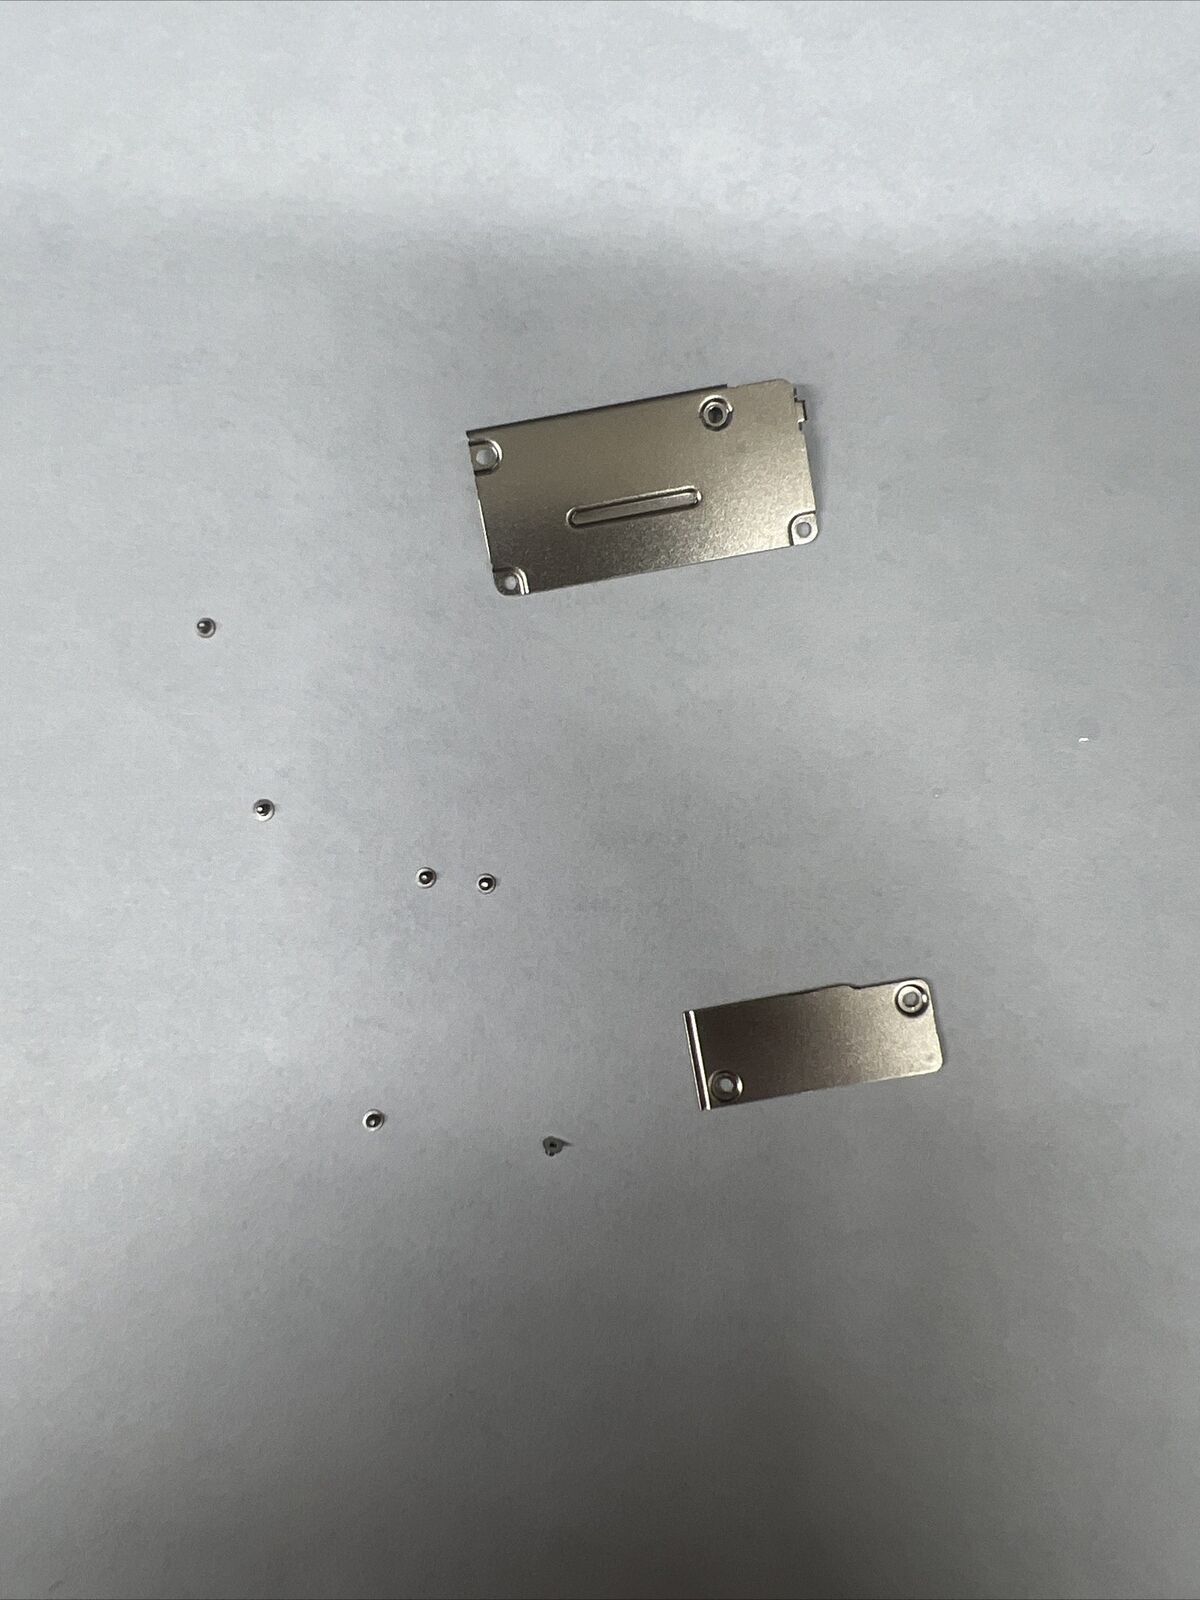 Original iPhone 12 Pro LCD And Battery Connector Metal Plates With Screws